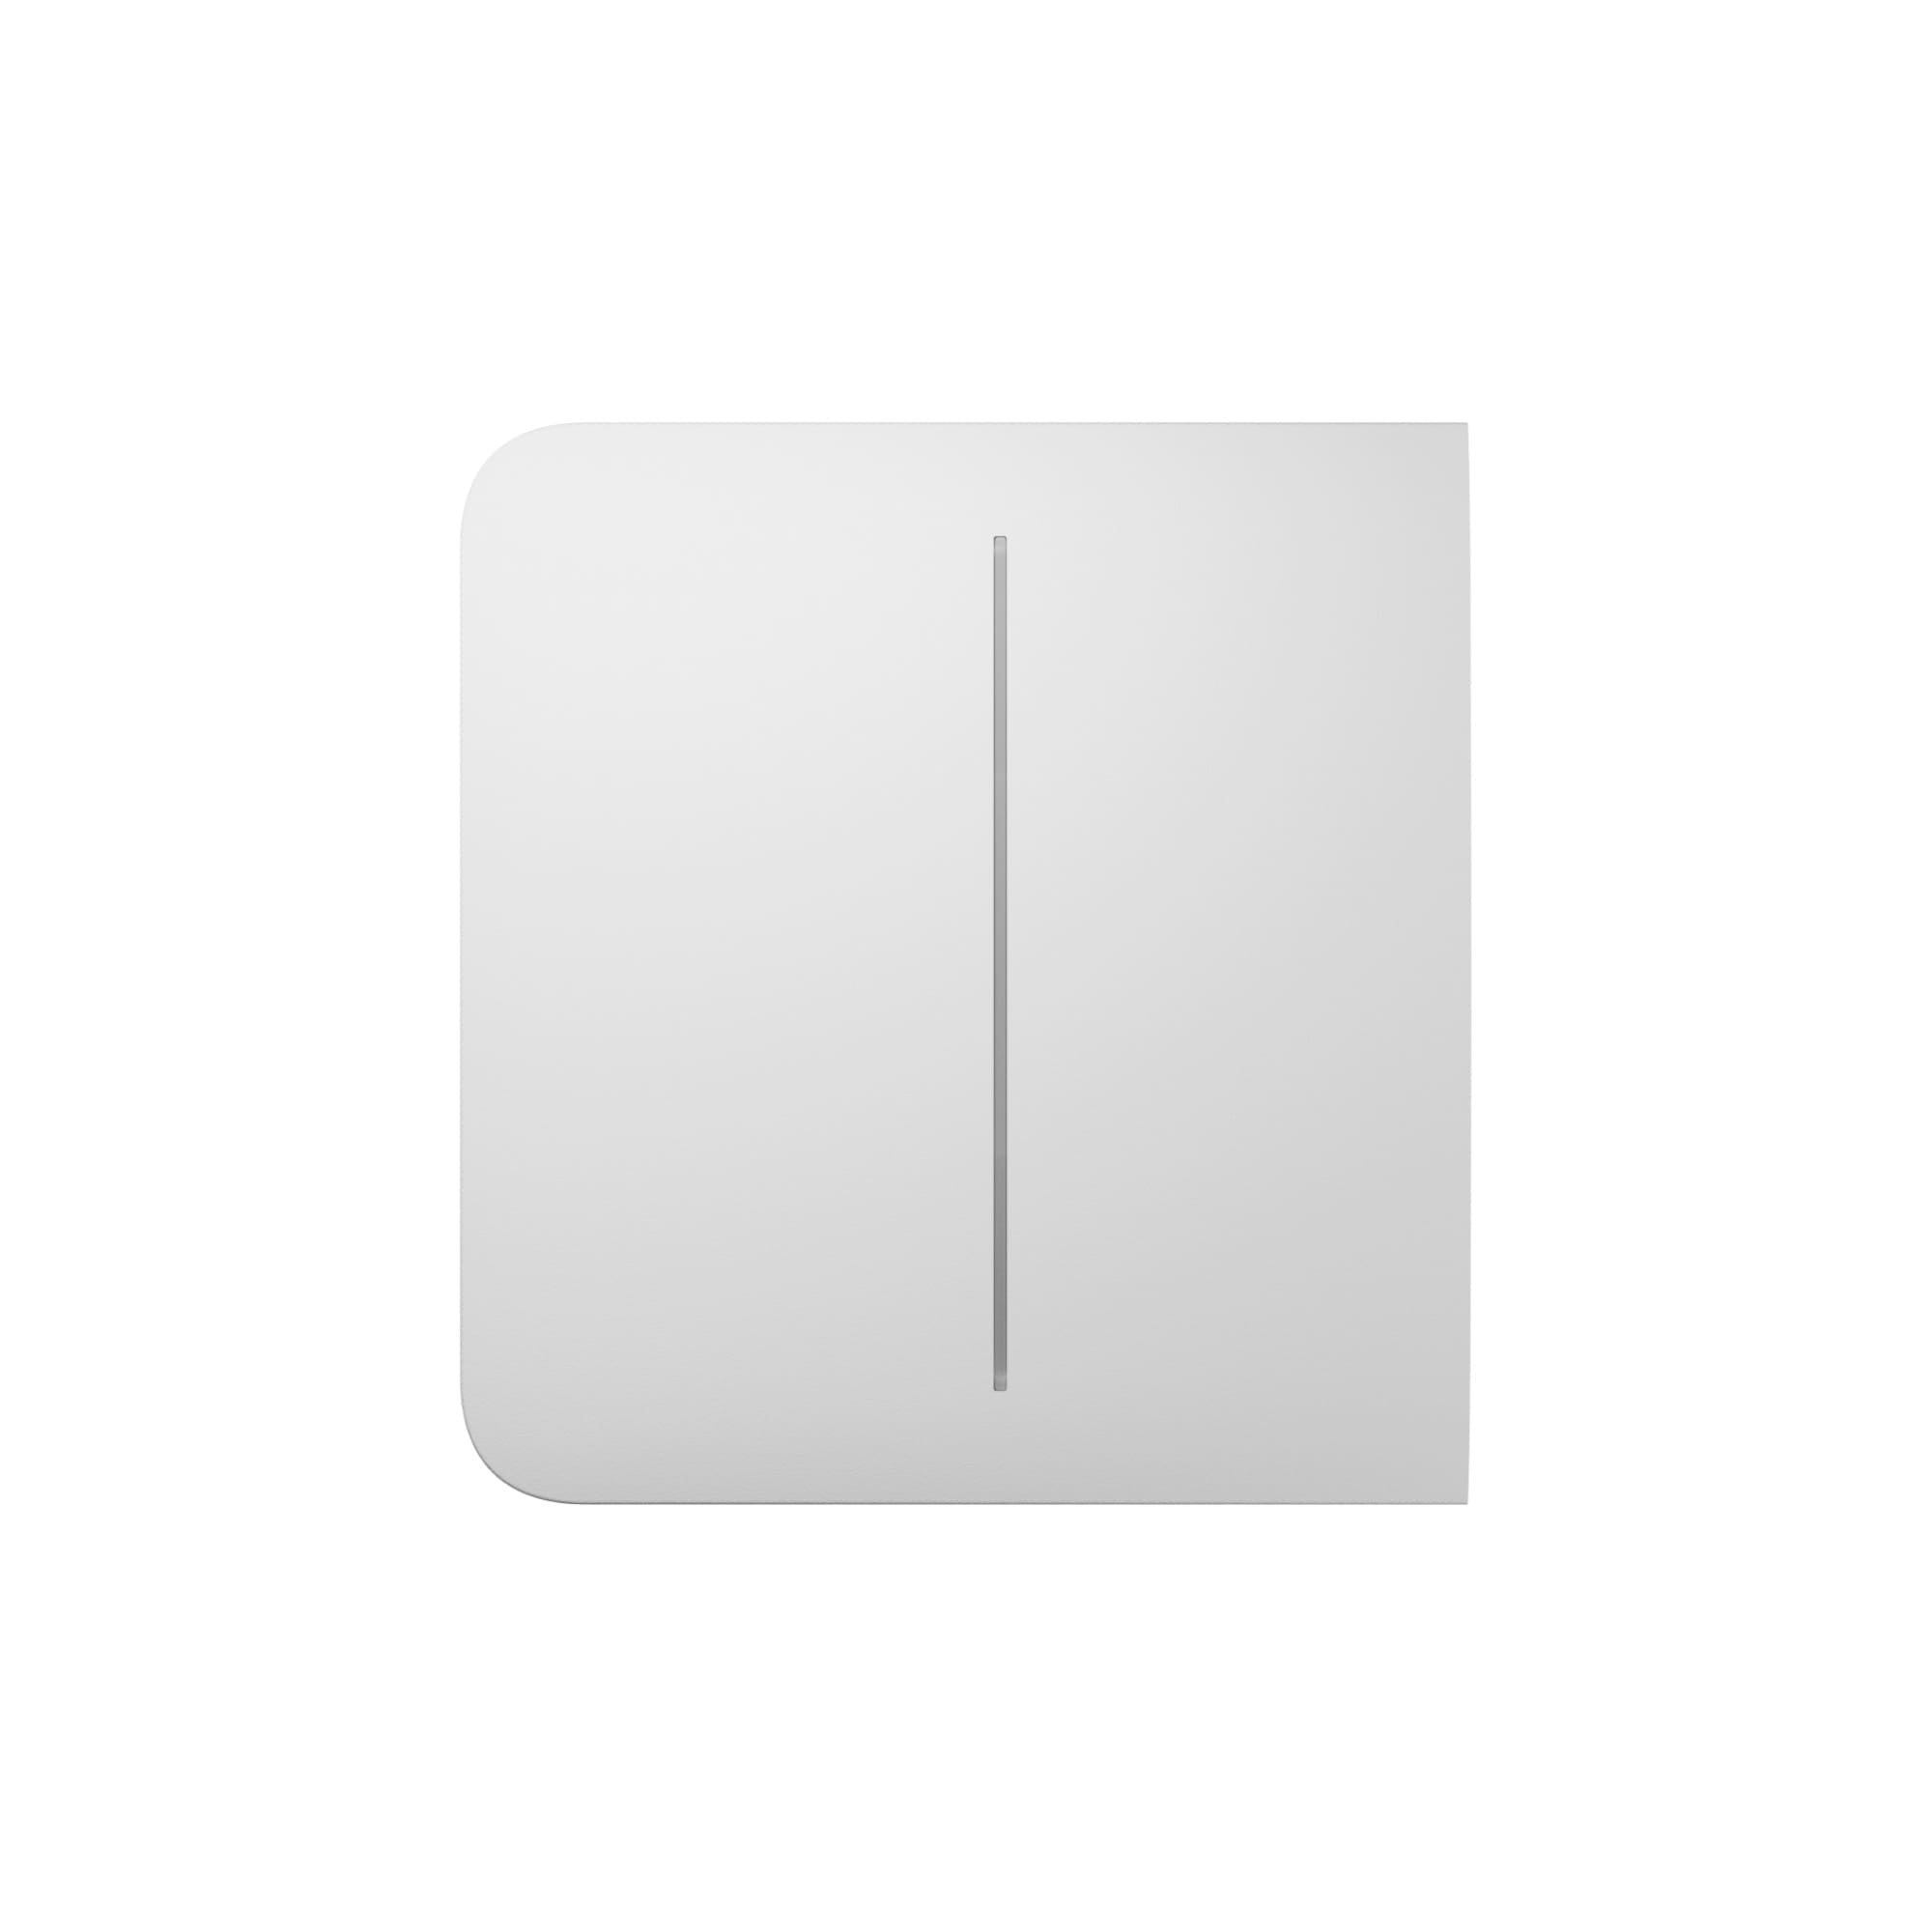 LightSwitch-button-side-2gang-white